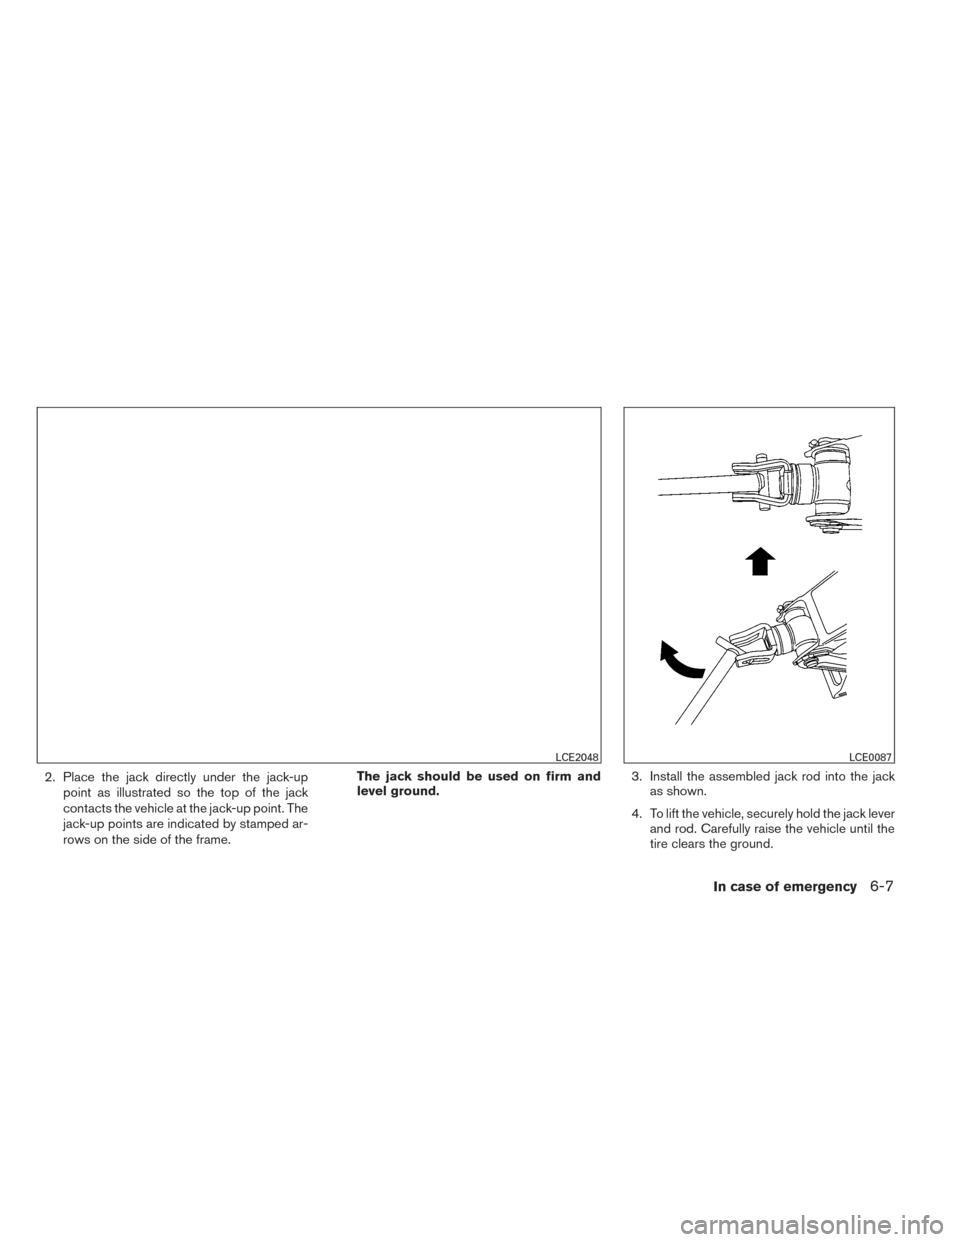 NISSAN PATHFINDER 2014 R52 / 4.G Owners Manual 2. Place the jack directly under the jack-uppoint as illustrated so the top of the jack
contacts the vehicle at the jack-up point. The
jack-up points are indicated by stamped ar-
rows on the side of t